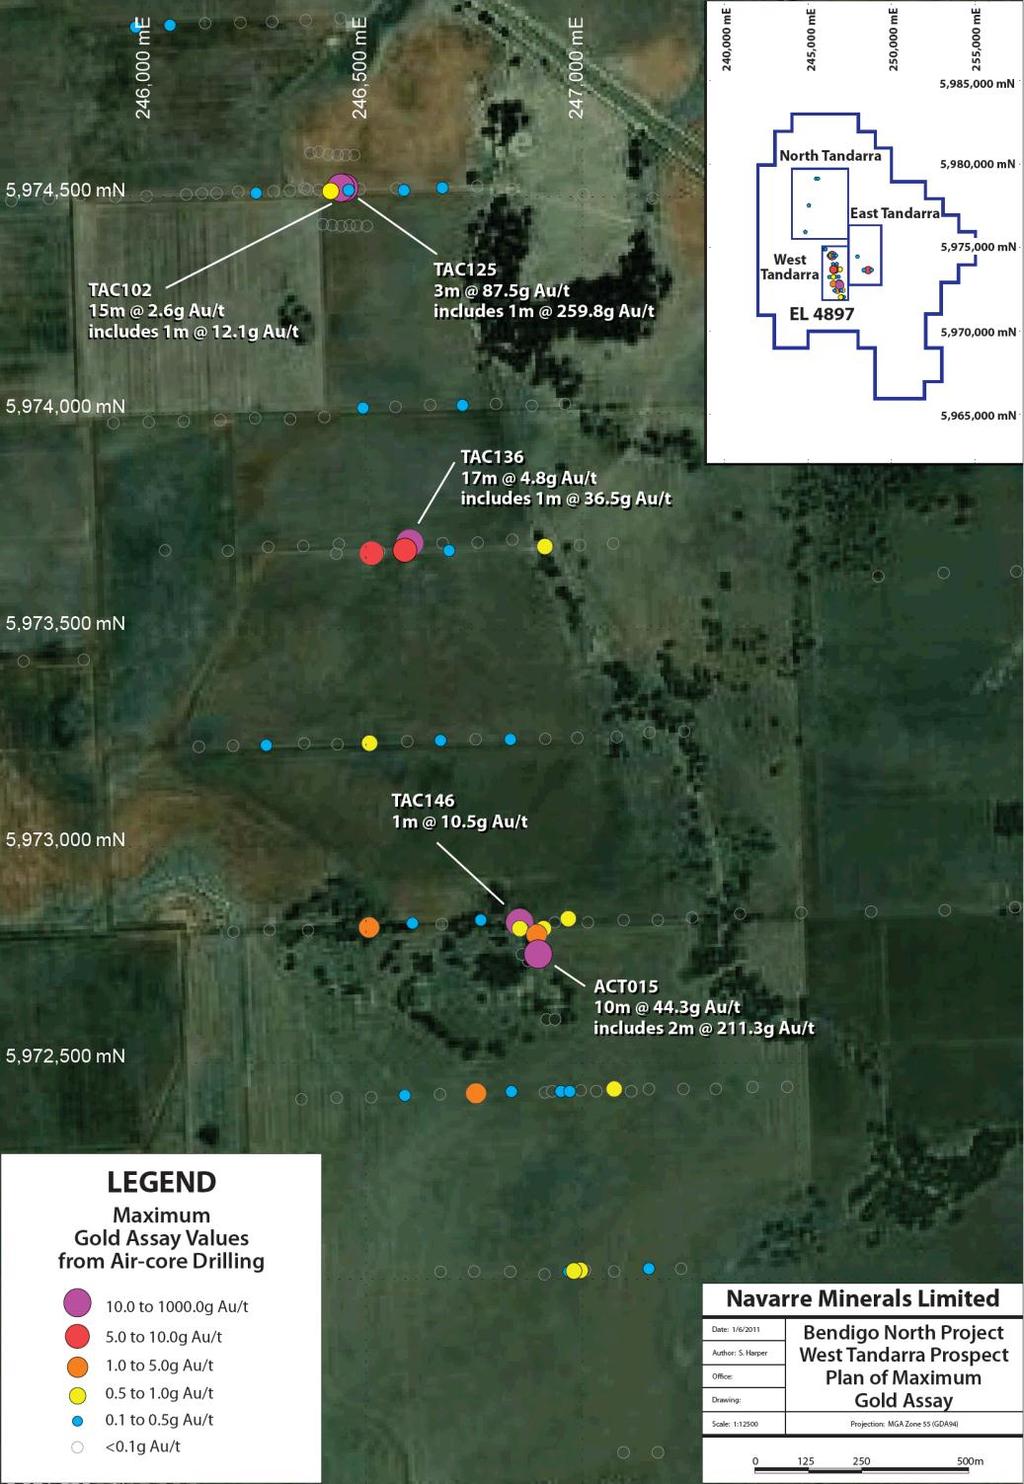 West Tandarra Prospect Maximum Gold Assays Broad spaced drill traverses have identified 2km + corridor of high-grade gold and quartz containing 3 separate intercepts with maximum values assaying